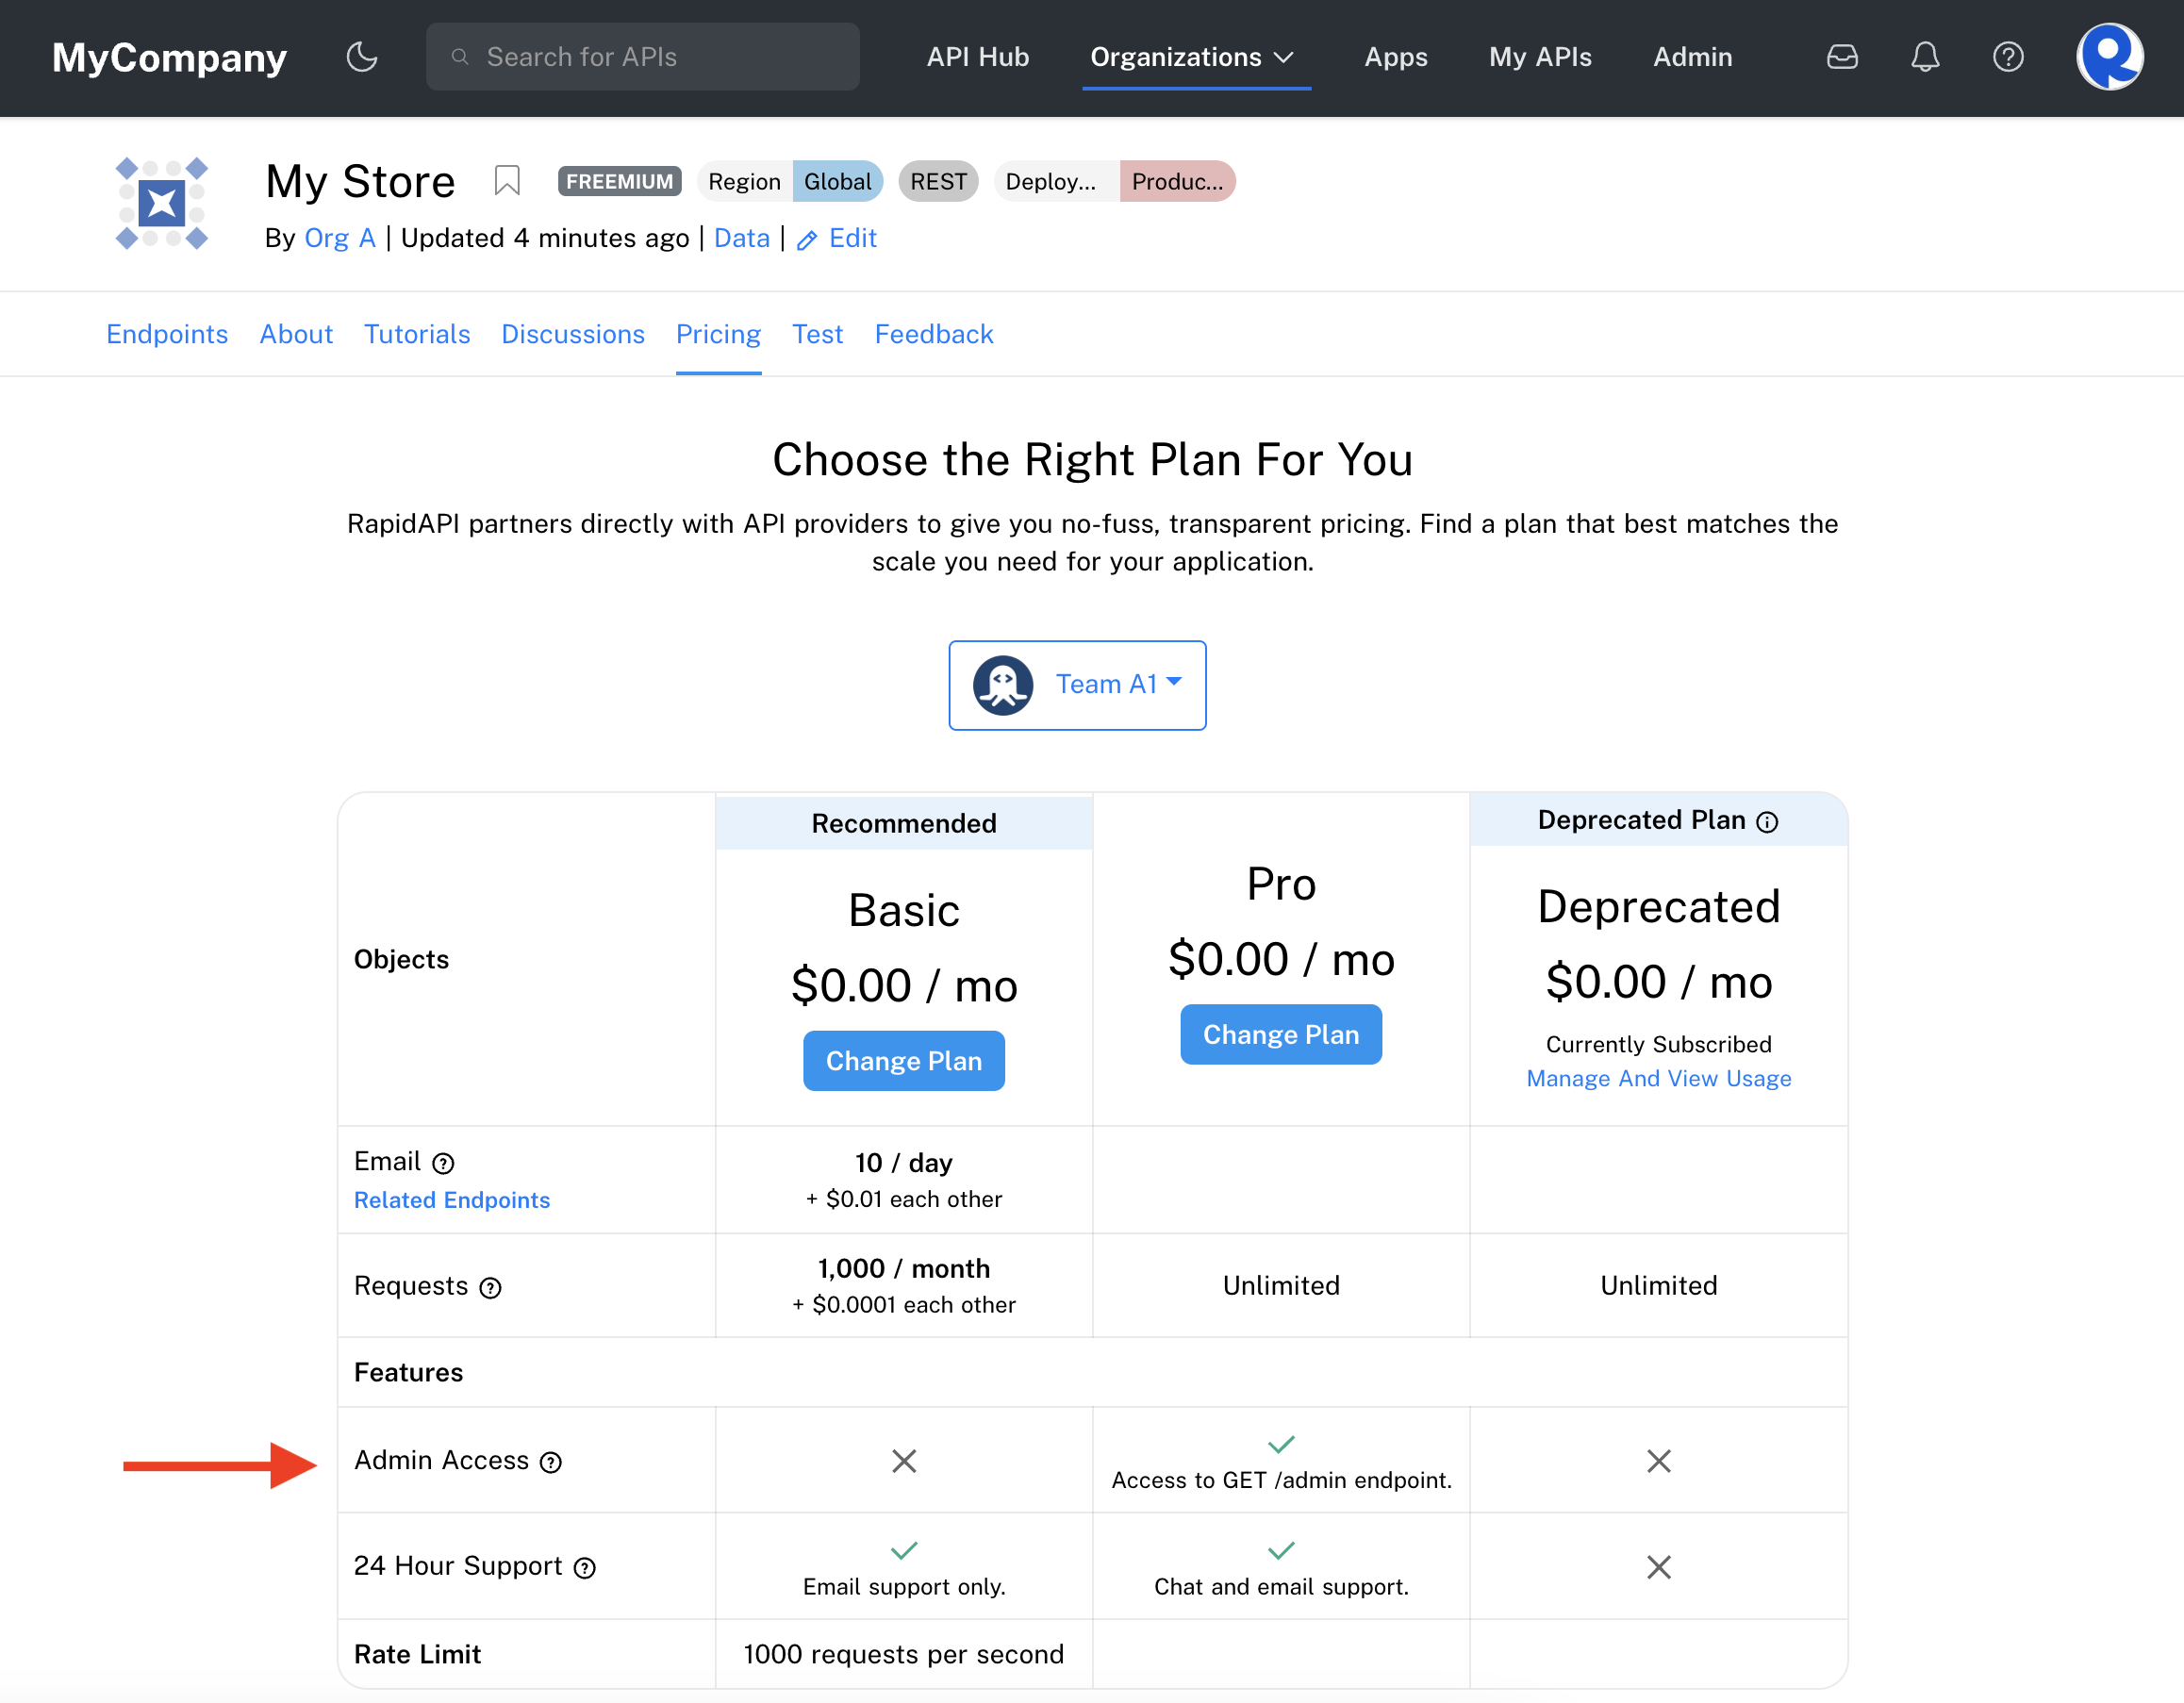 The Pricing tab with multiple Objects, Features, and plans.